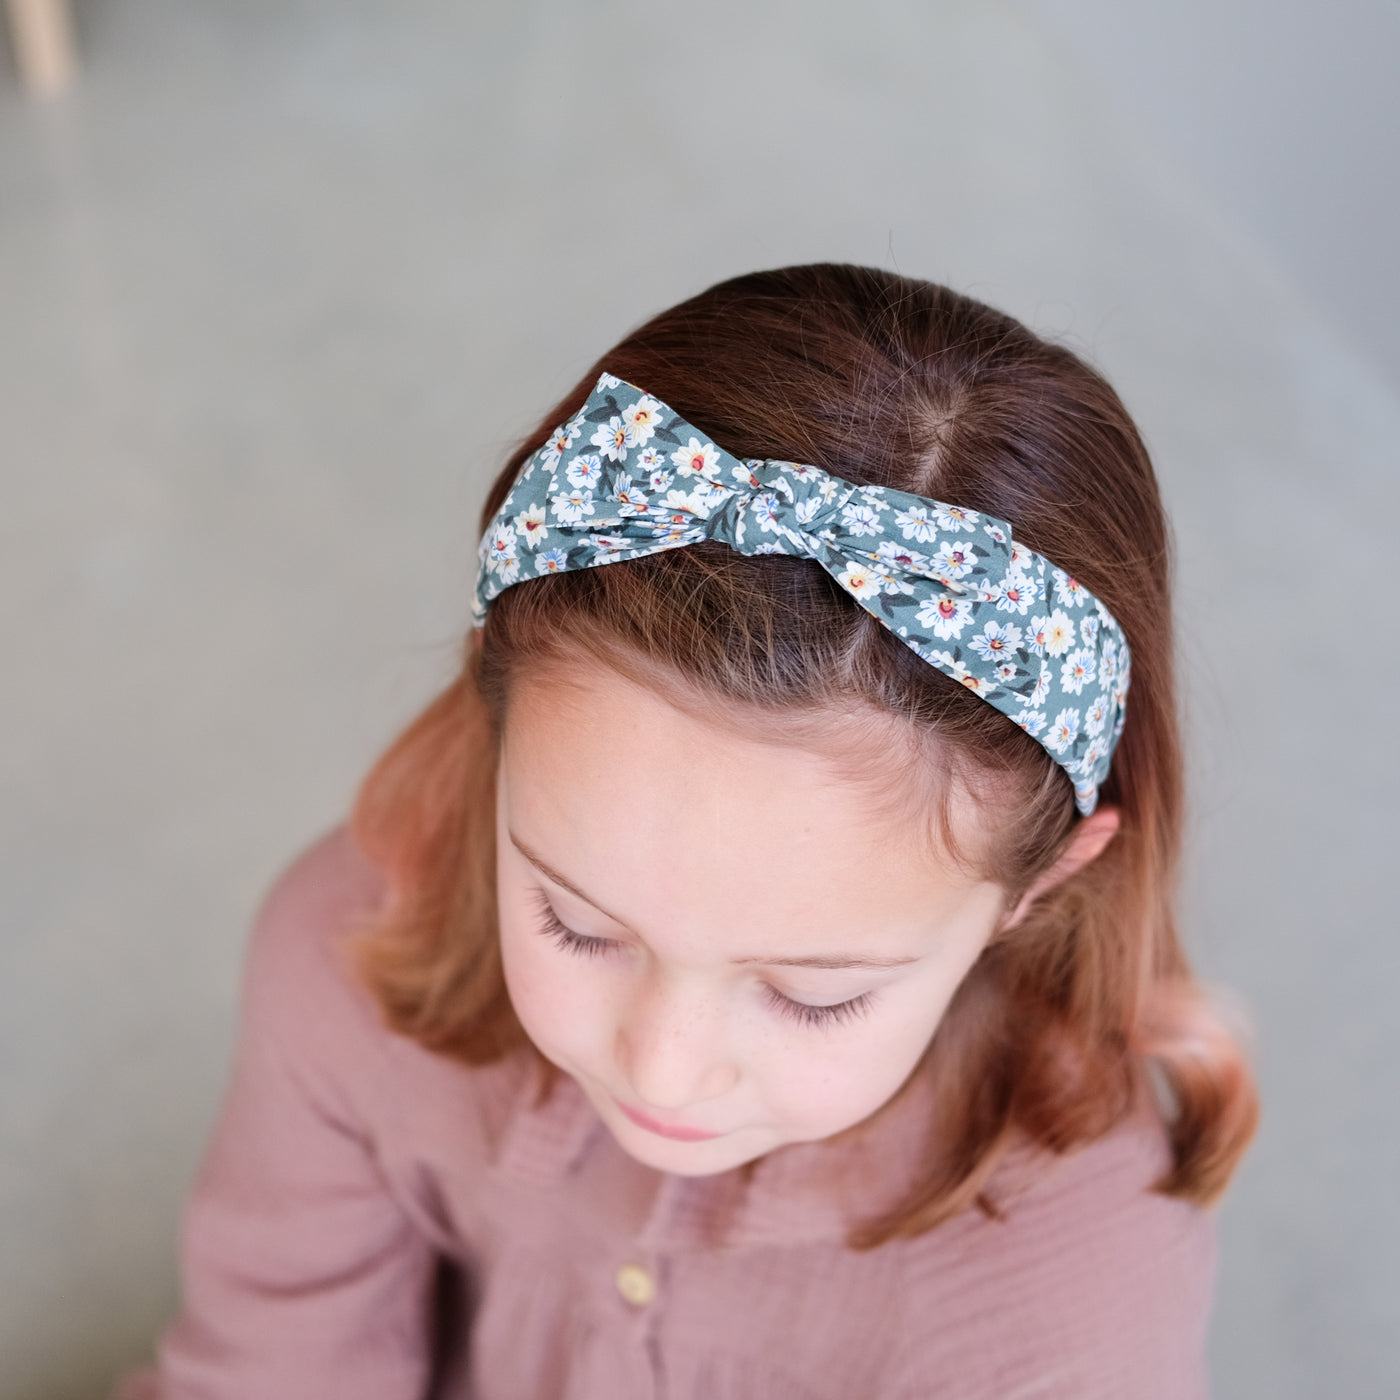 Sweet, floral print Alice band with bow worn by a little girl